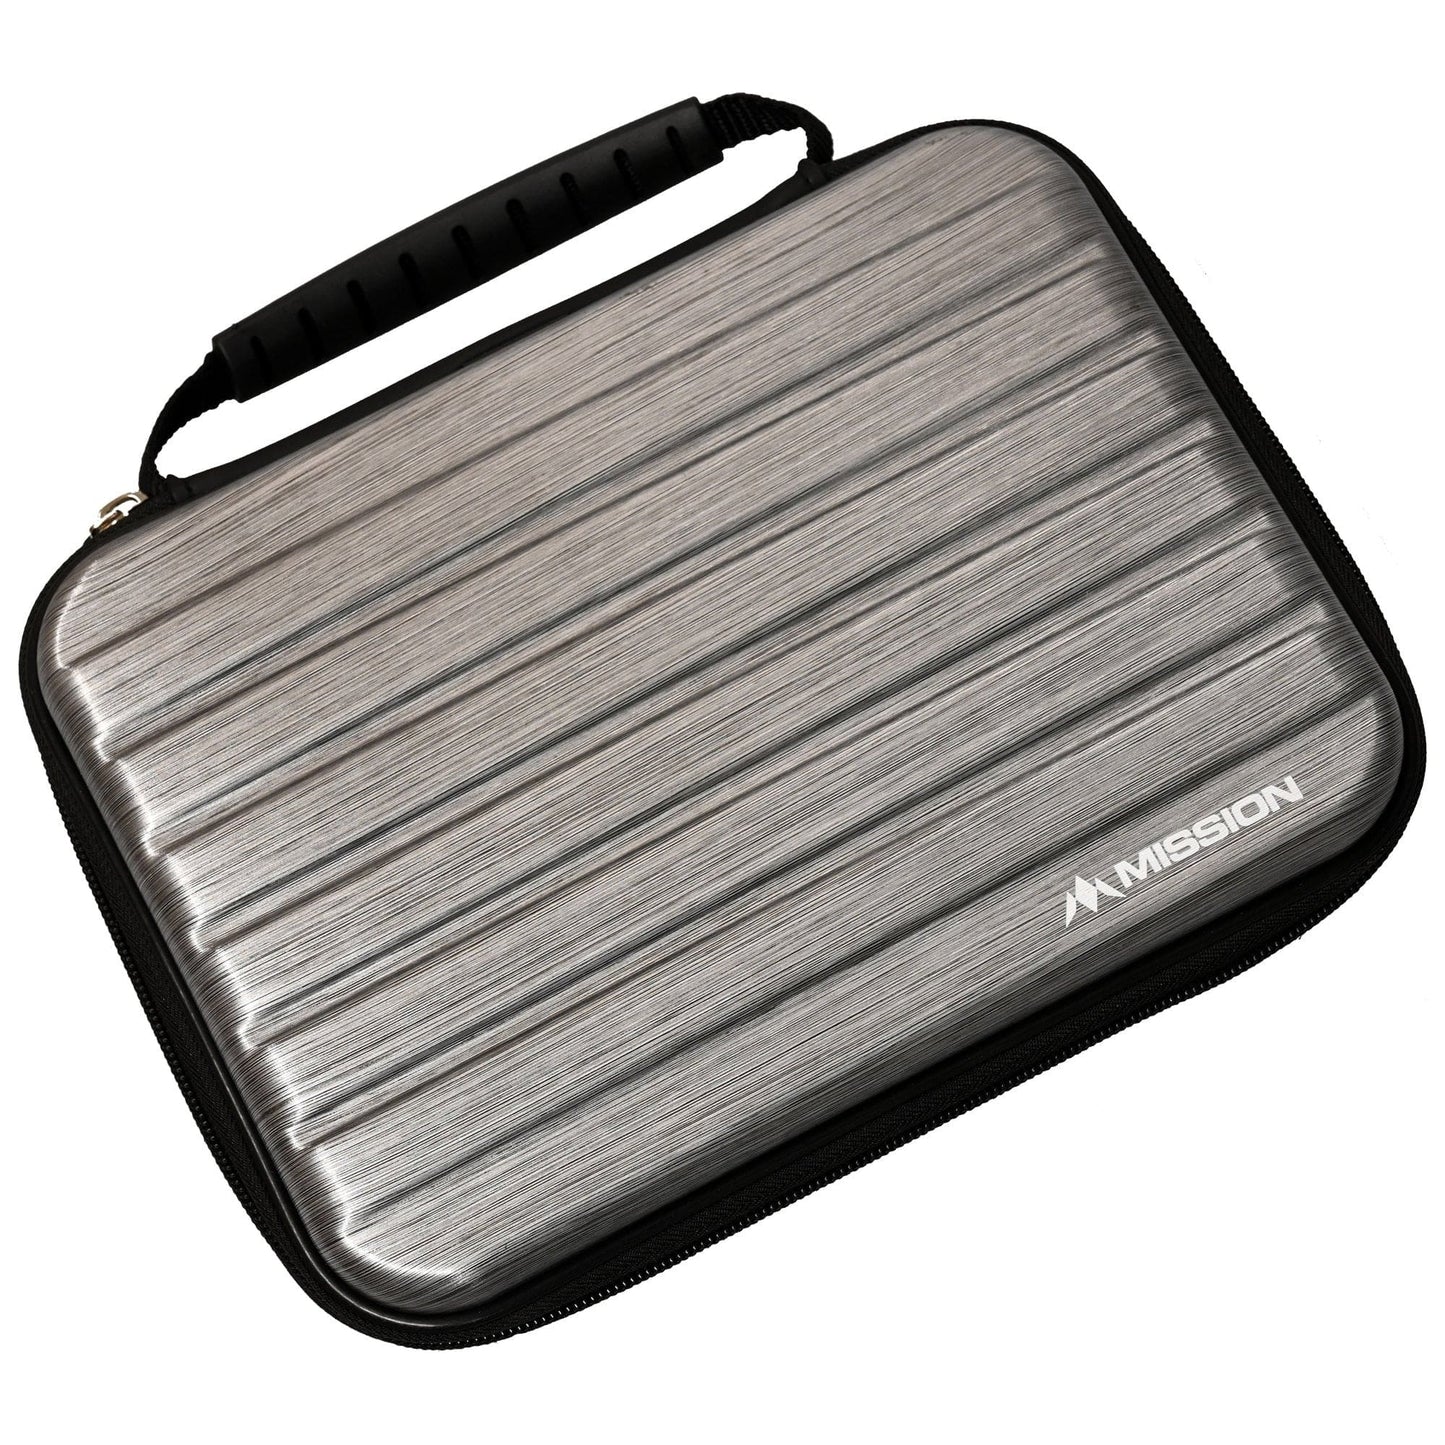 Mission ABS-4 Darts Case - Strong Protection - Metallic